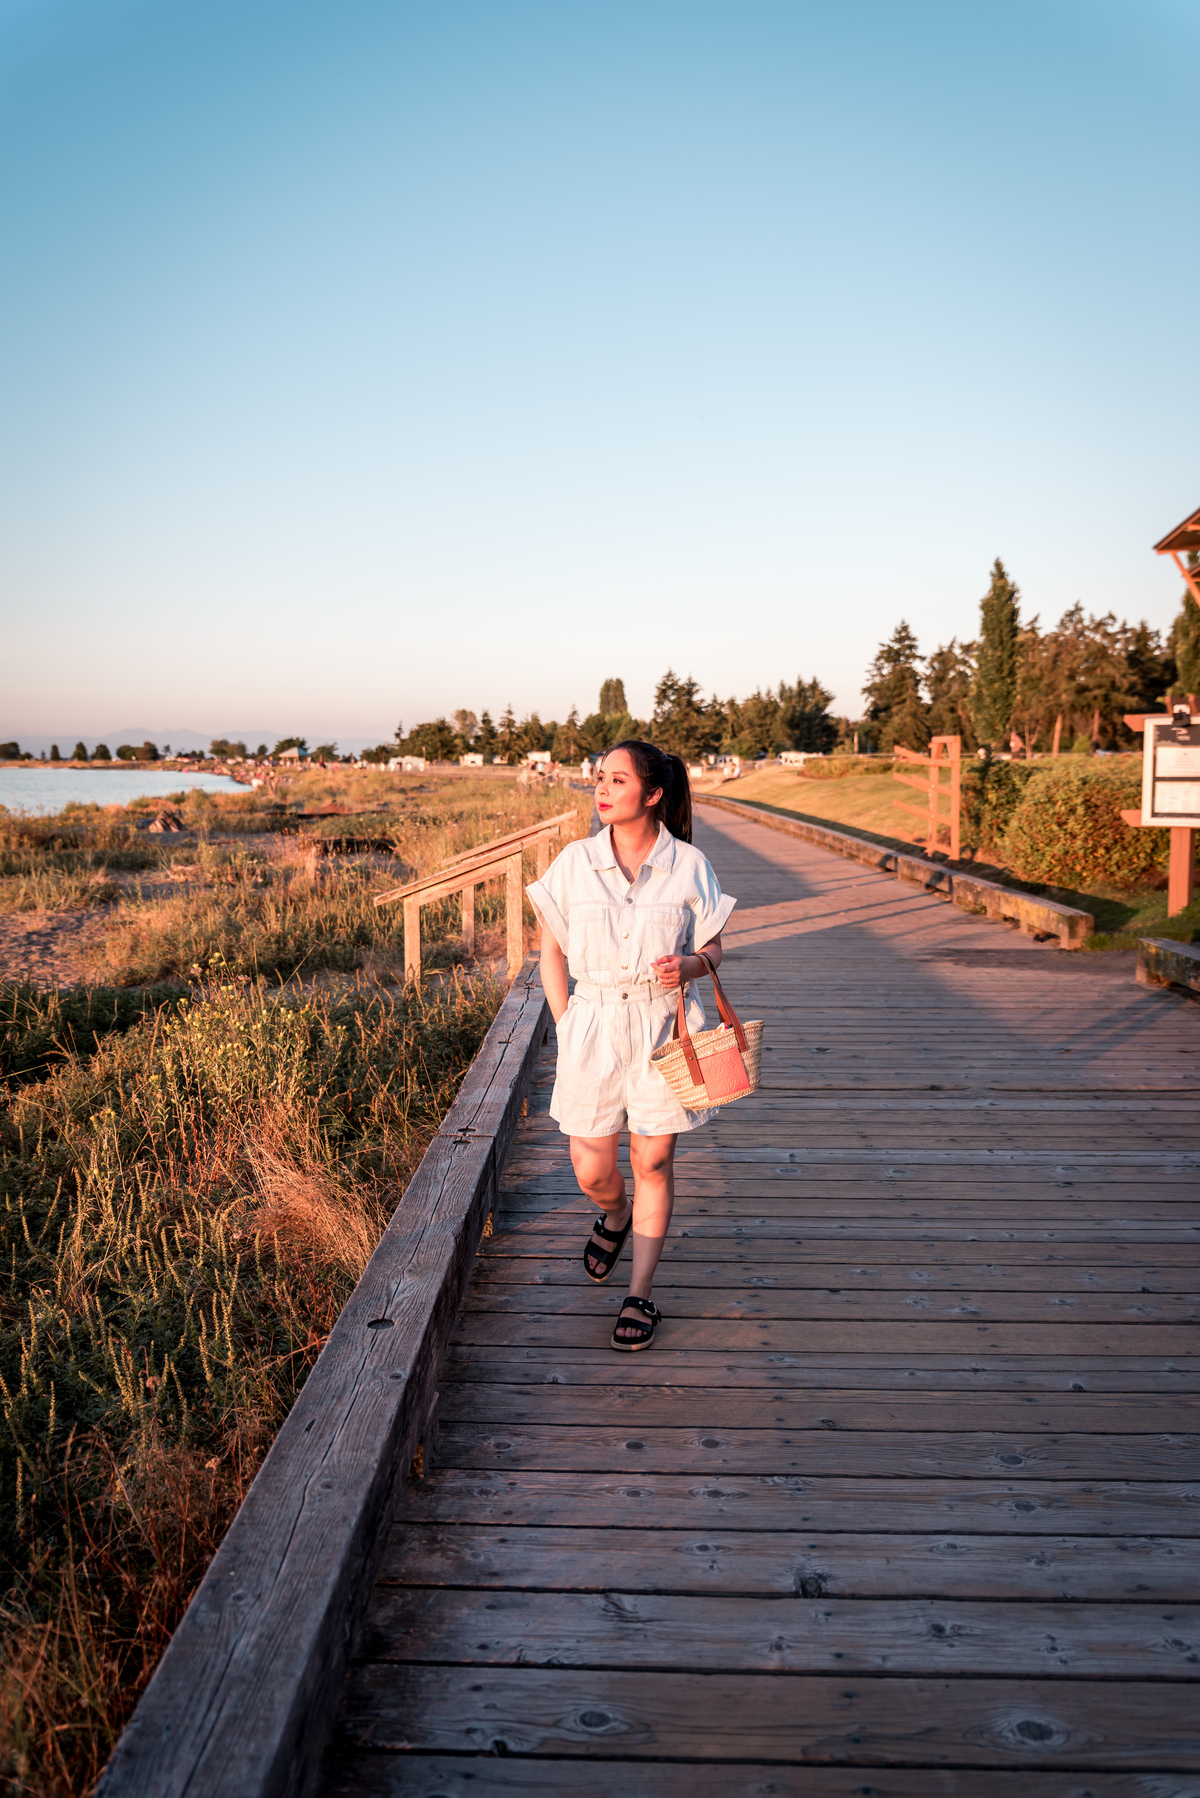 Yvonna Chow walks down a boardwalk next to the ocean. The sun is shining on her as she approaches the camera.